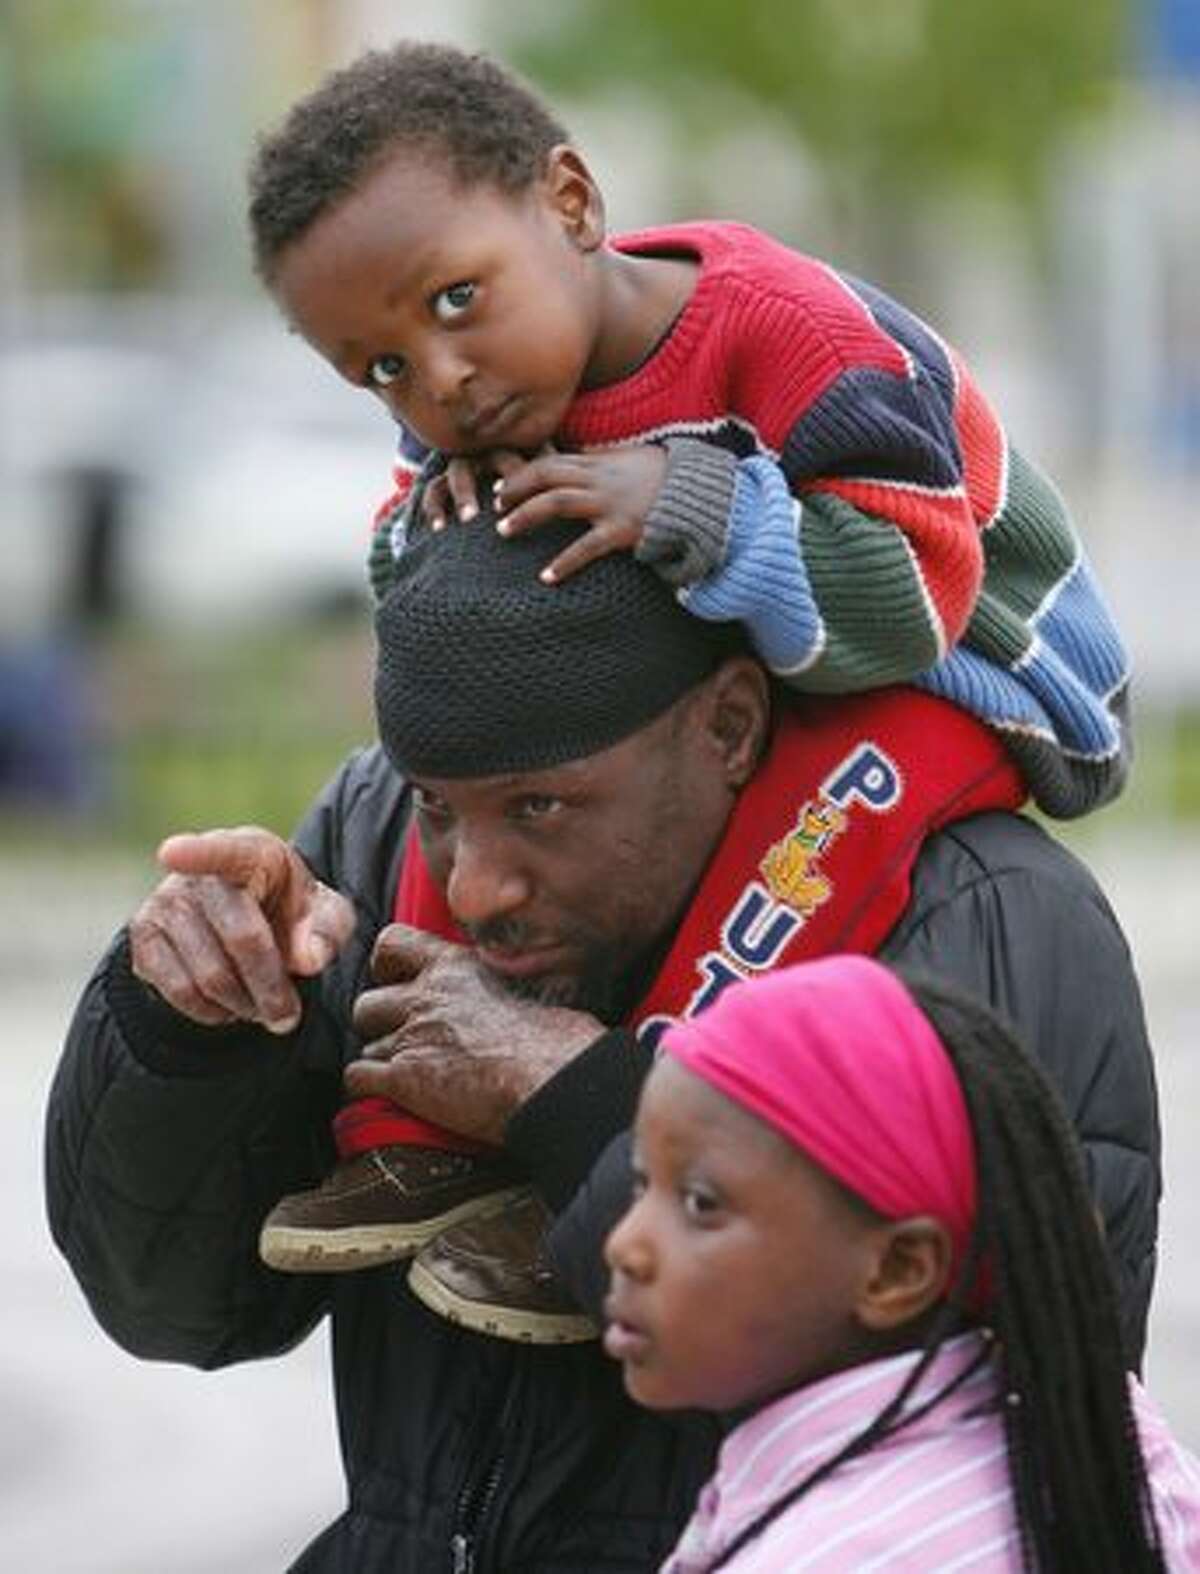 Khalfami Mwamba watches a performance with his son Oteko, 2, and daughter Ndalo, 8, during a Juneteenth community celebration hosted by the Atlantic Street Center at the Rainier Beach Community Center on Thursday June 17, 2010. Juneteenth is a holiday that commemorates African American freedom from slavery, while emphasizing education and achievement. This is the 10th year the Atlantic Street Center has hosted the celebration in Seattle.